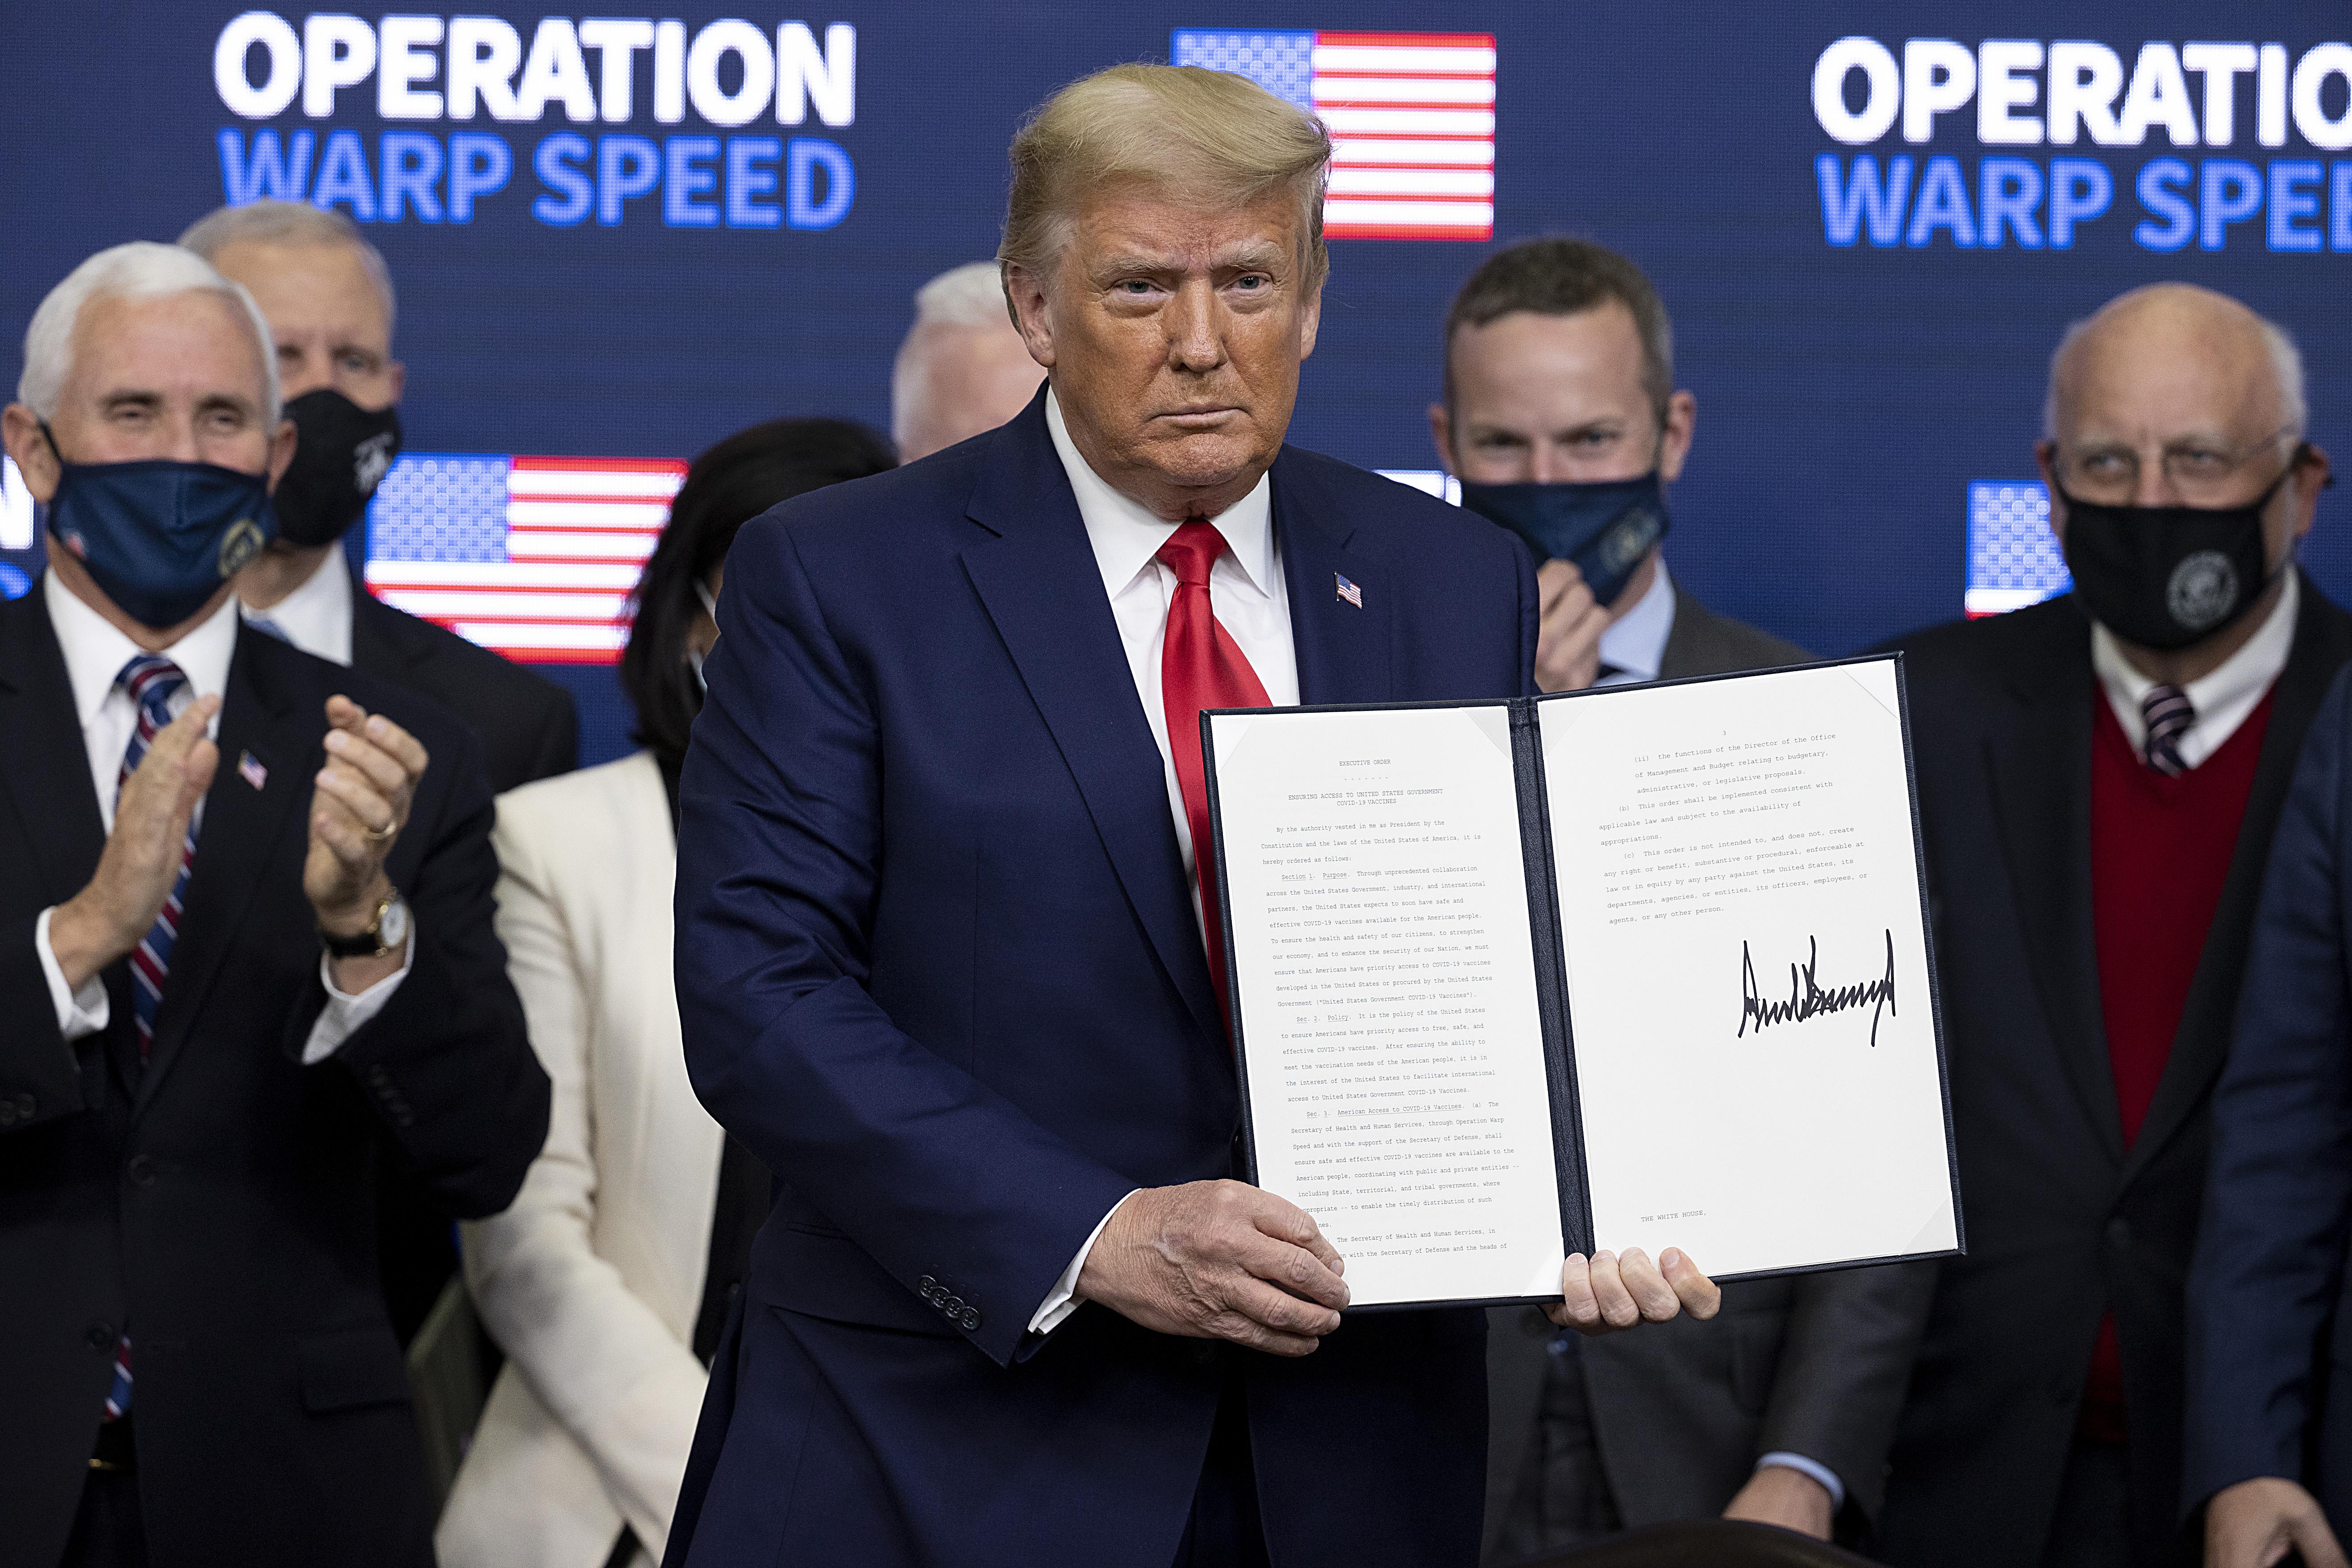 Trump holds up a bill with his signature.